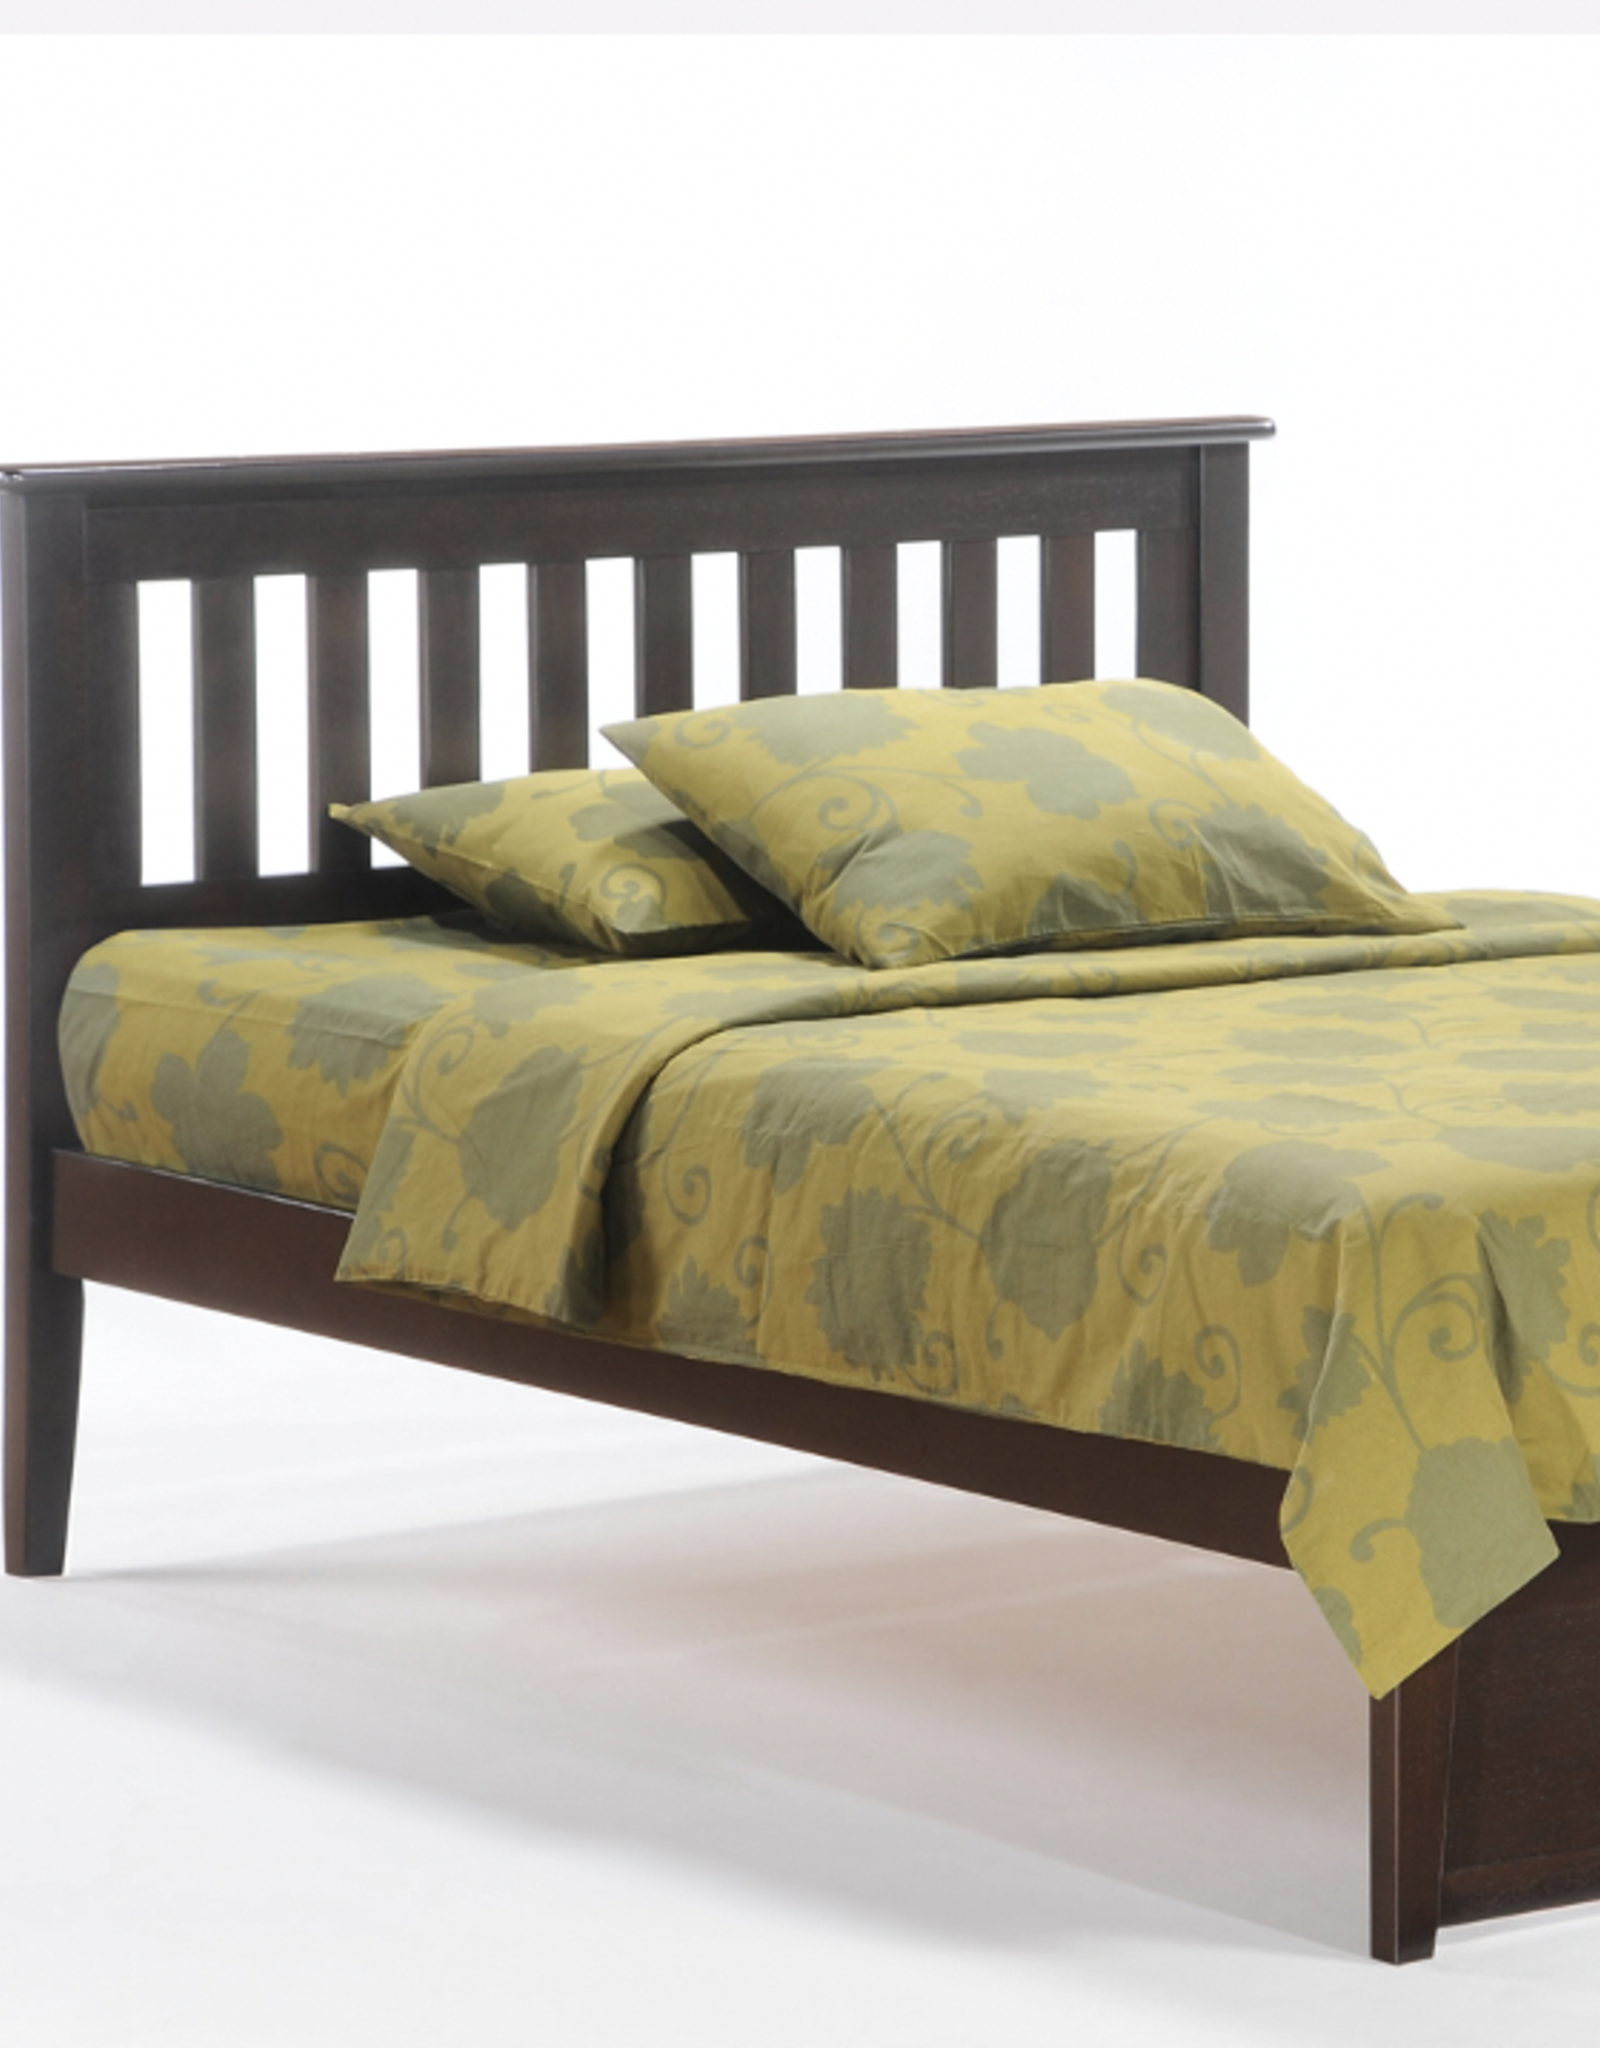 Rosemary Headboard - Comes in Five Colors